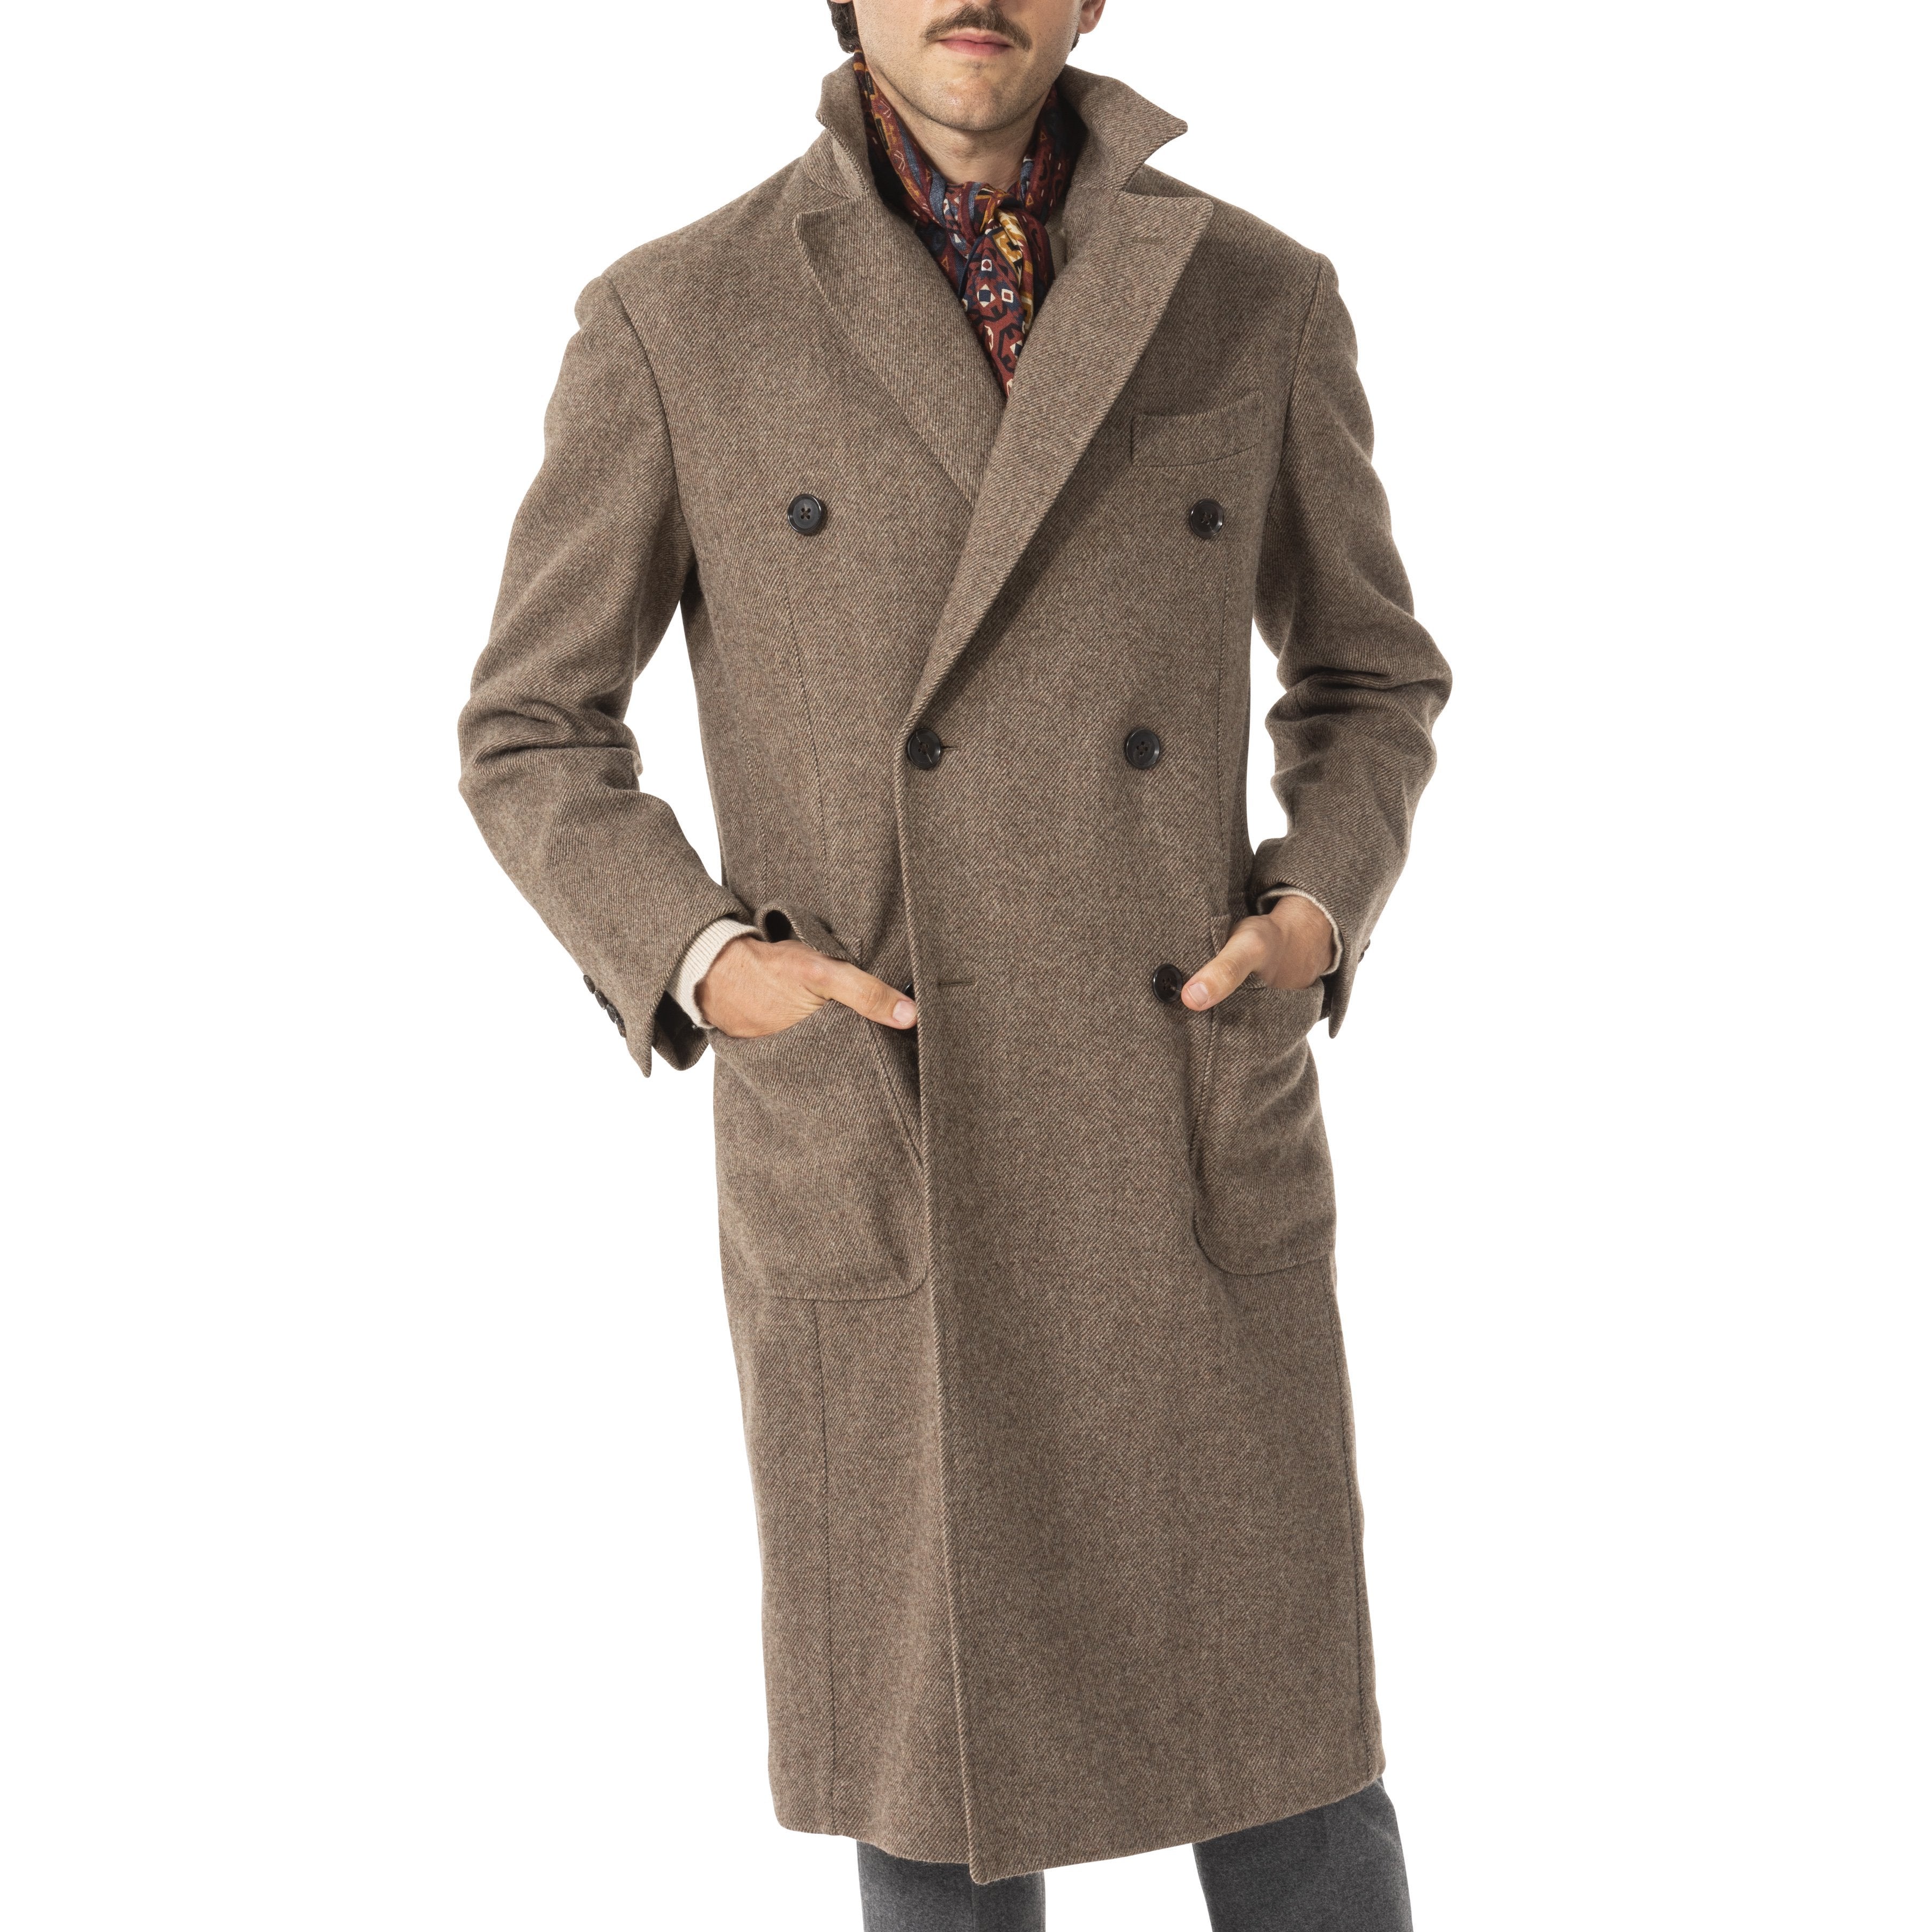 Wool Twill Overcoat - The Armoury